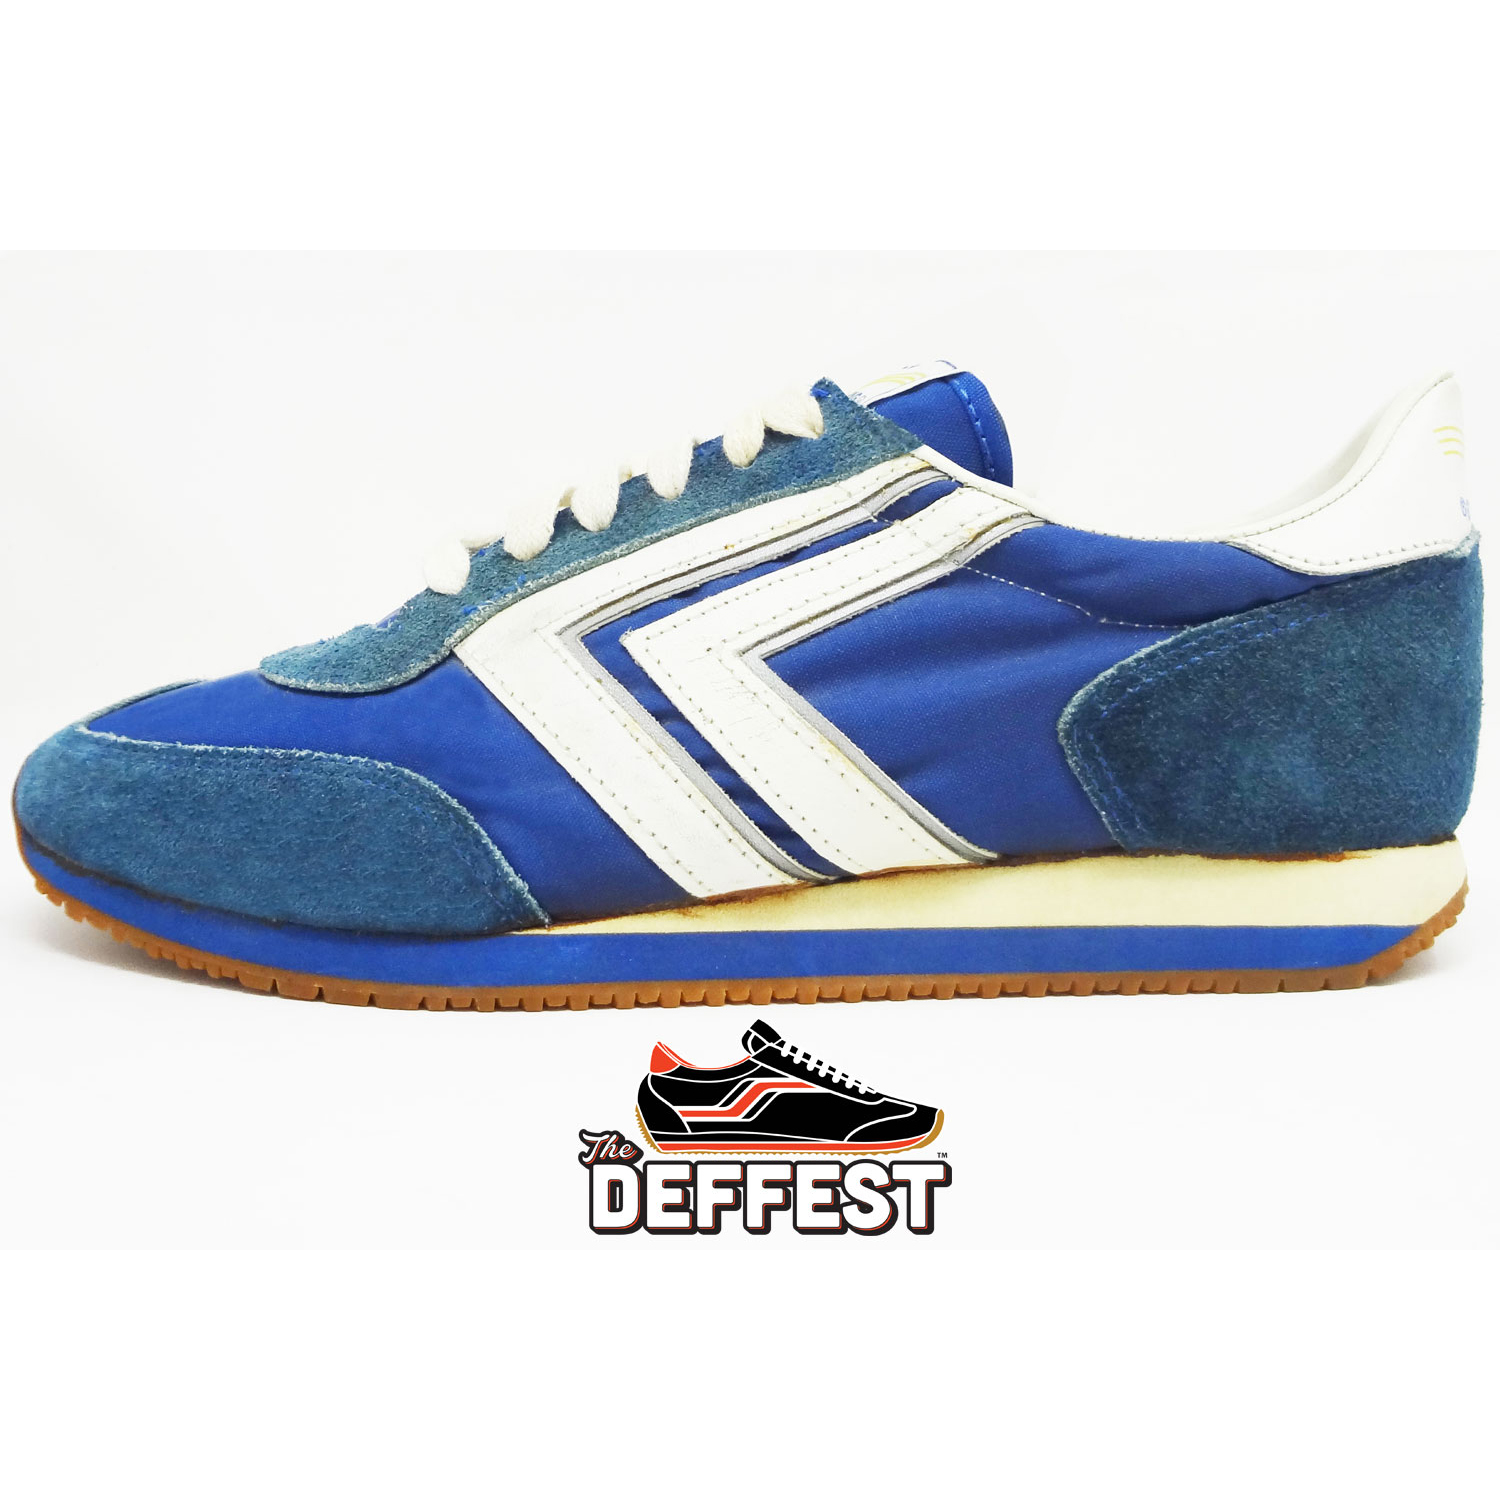 The Deffest®. A vintage and retro sneaker blog.